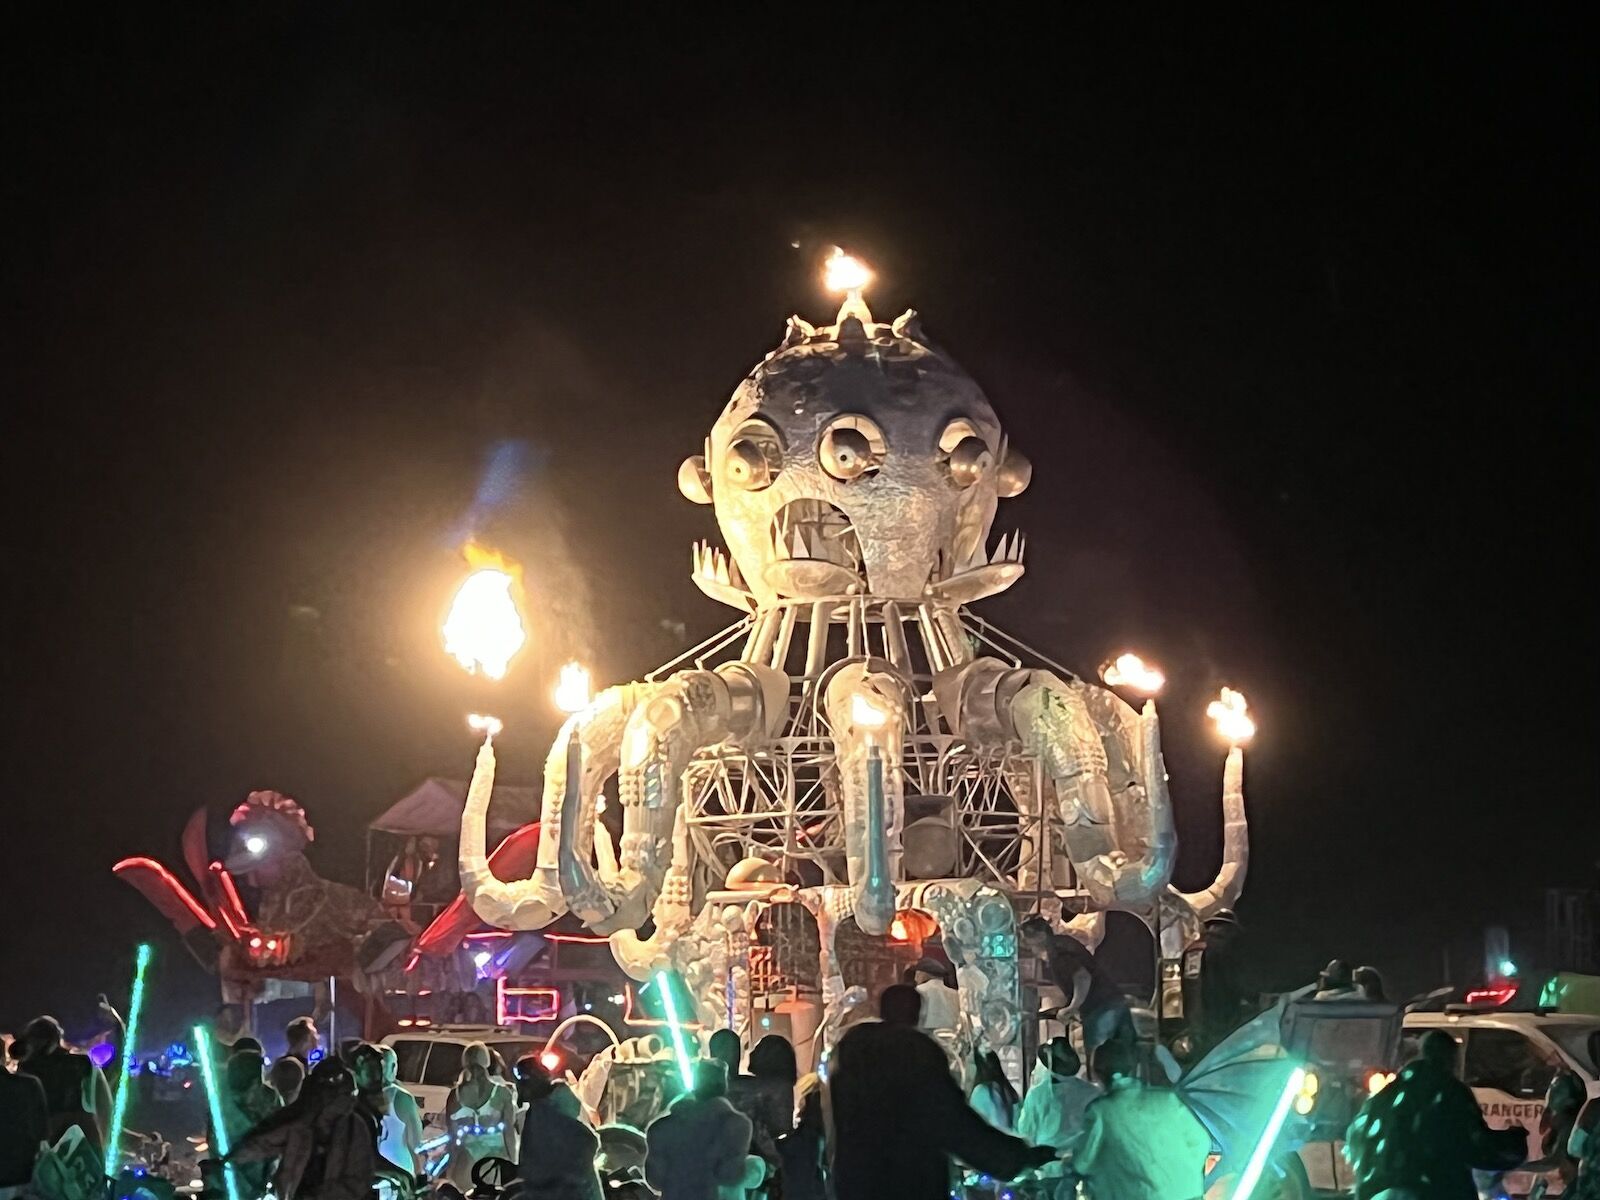 Art from Burning Man 2022: "El Pulpo Magnifico" by Duane Flatmo